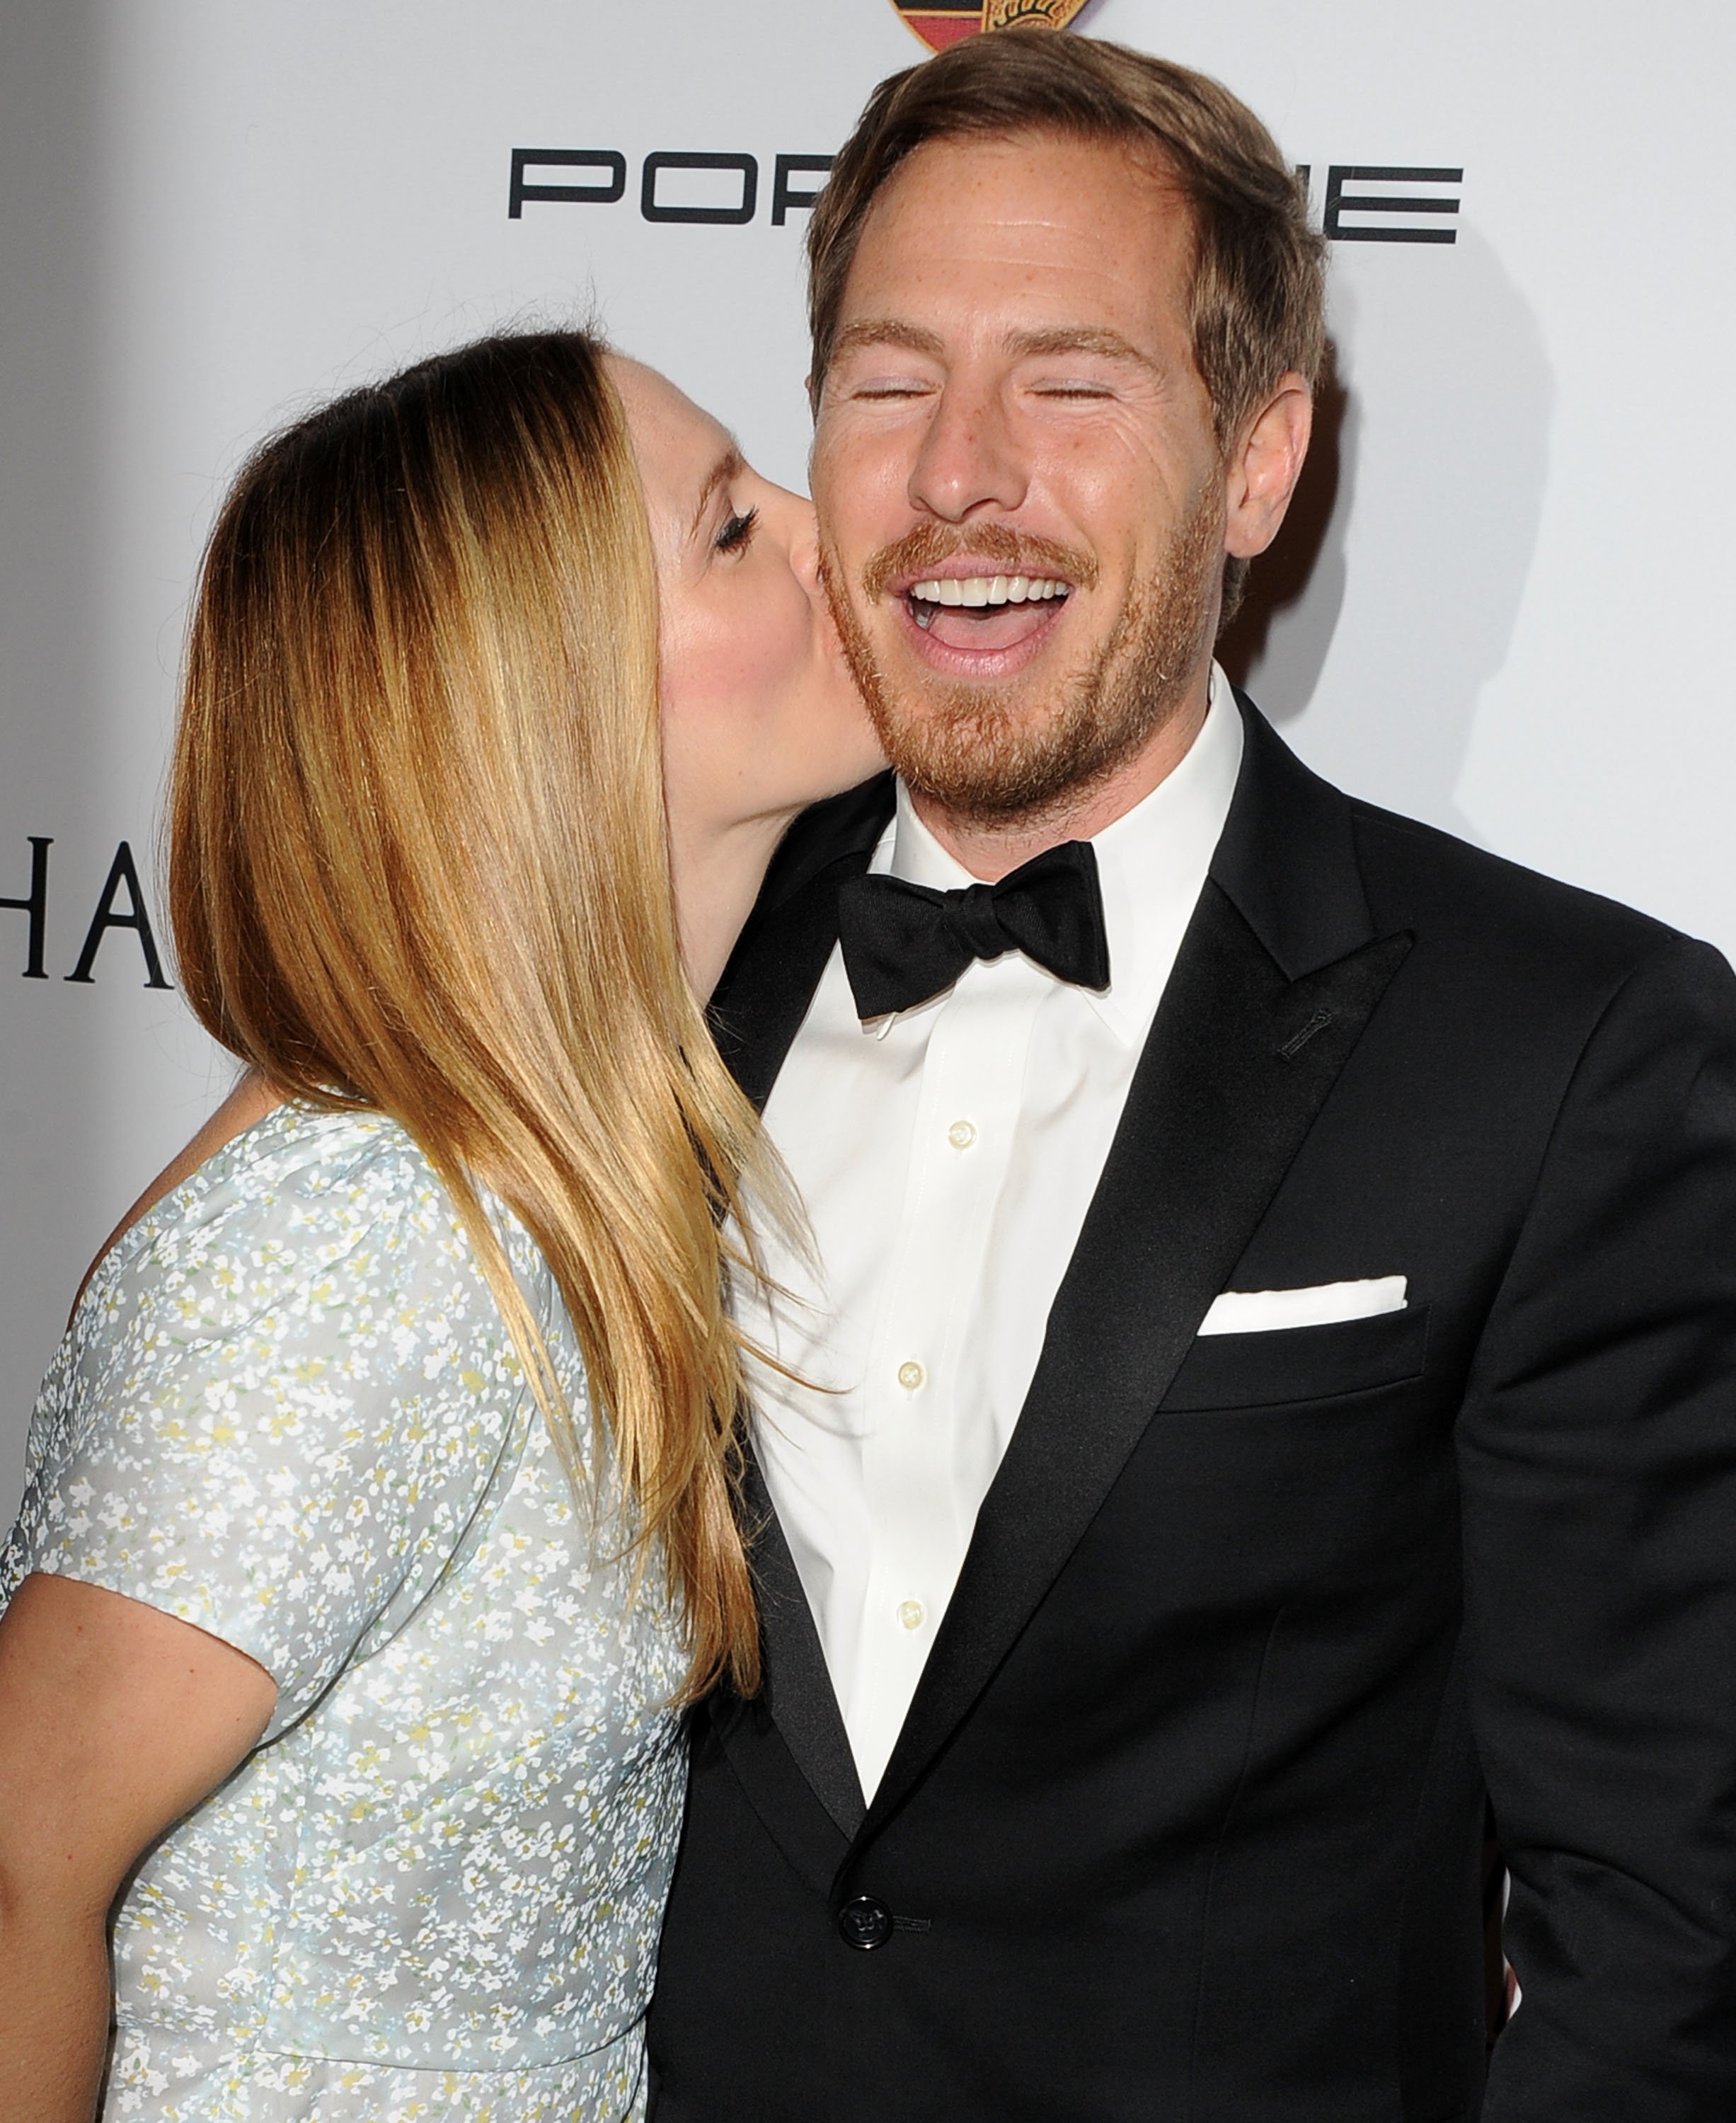 Drew Barrymore and Will Kopelman arriving at the 2nd Annual Baby2Baby Gala at The Book Bindery on November 9, 2013 in Culver City, California. / Source: Getty Images